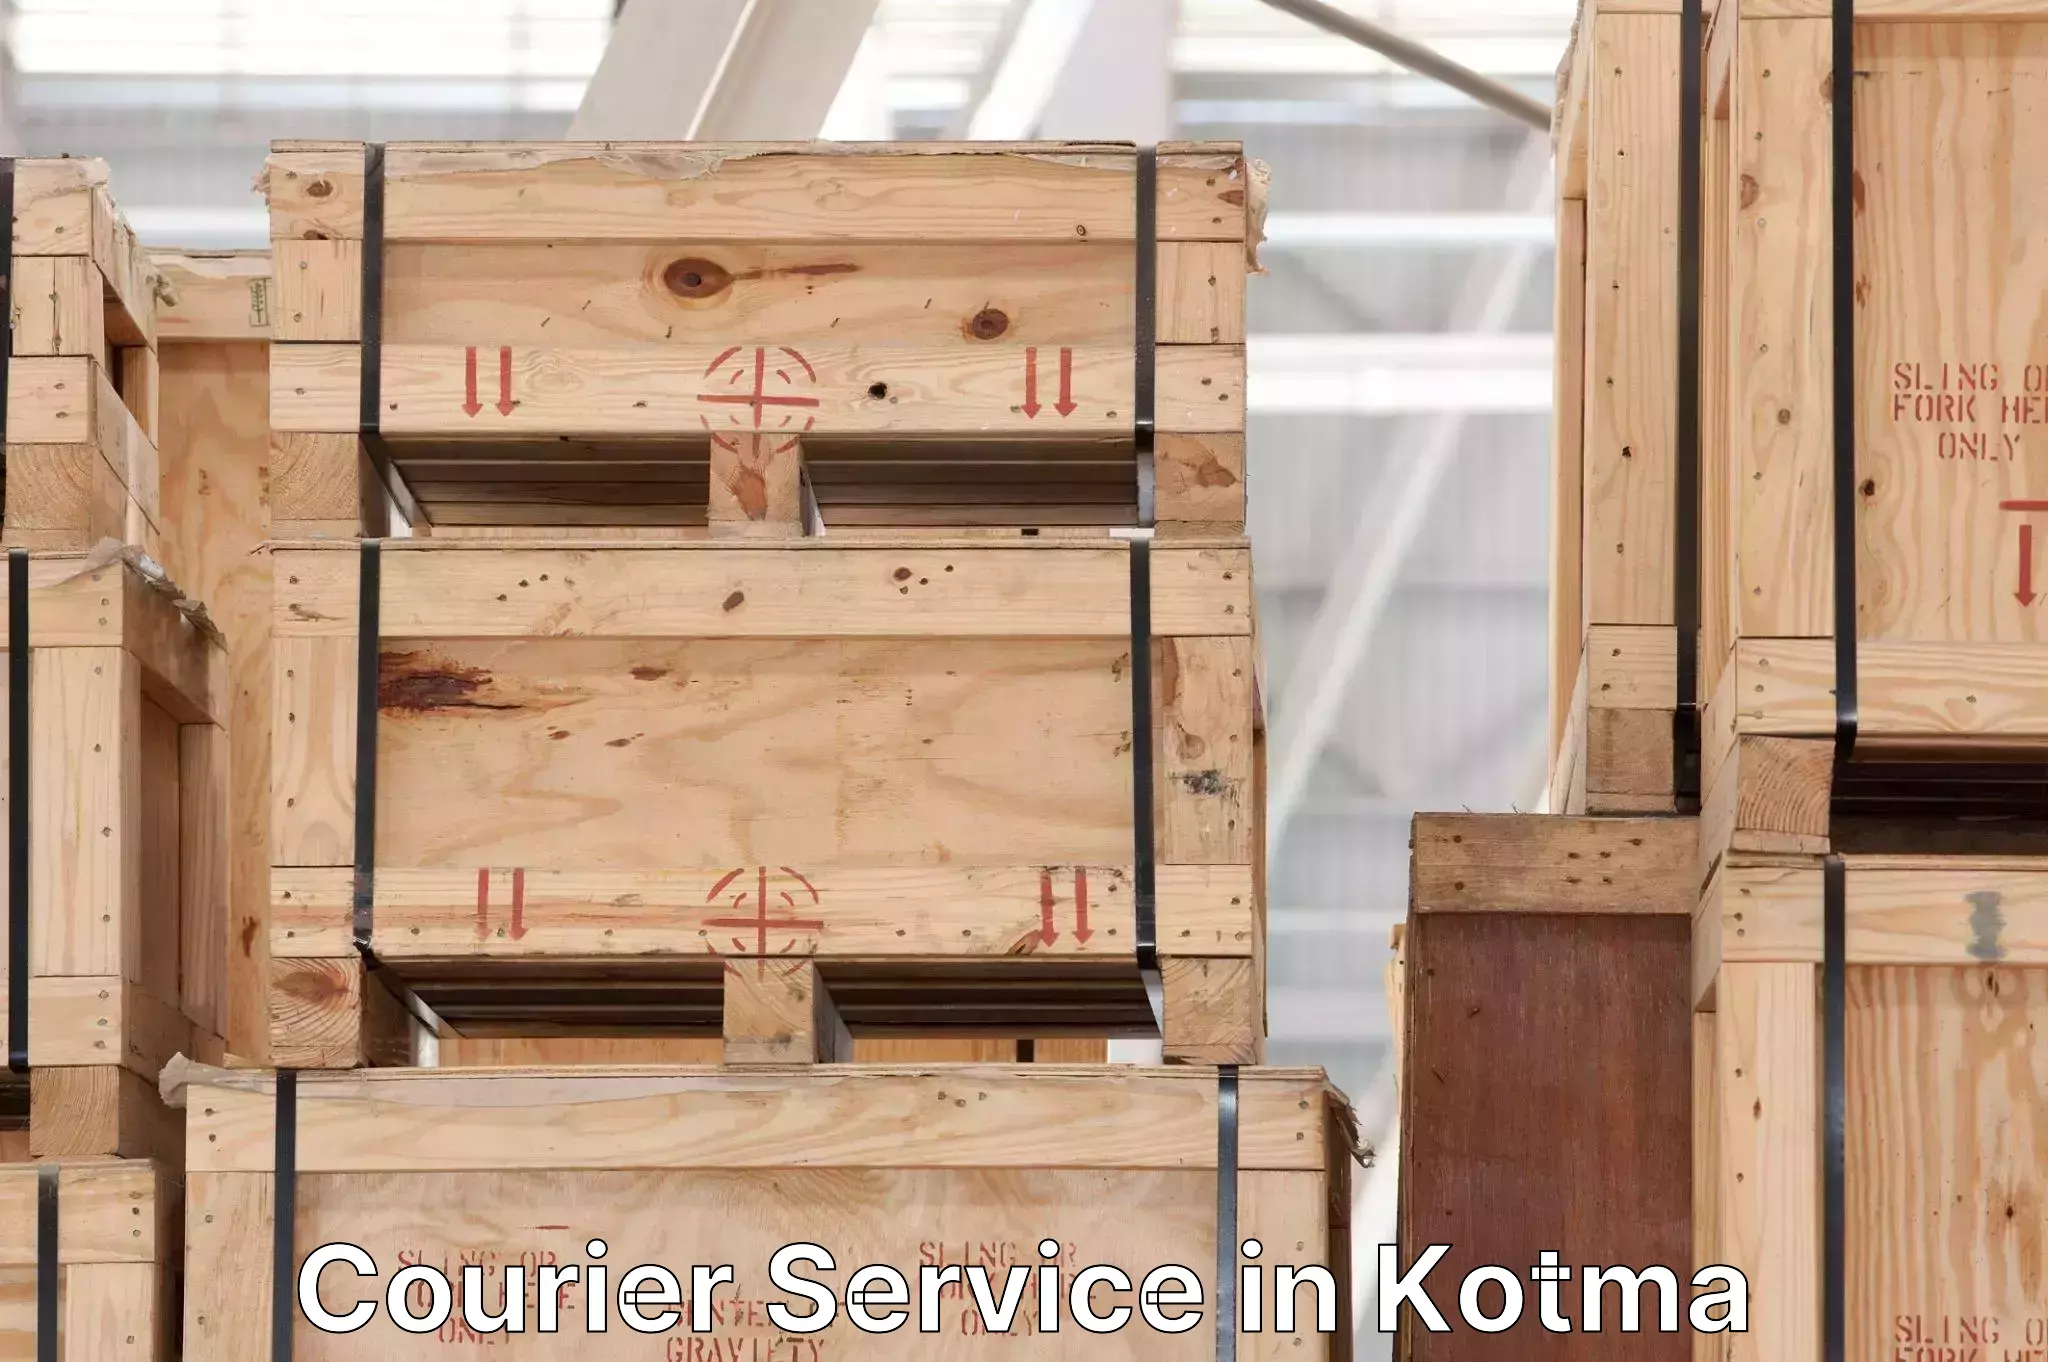 Express package delivery in Kotma